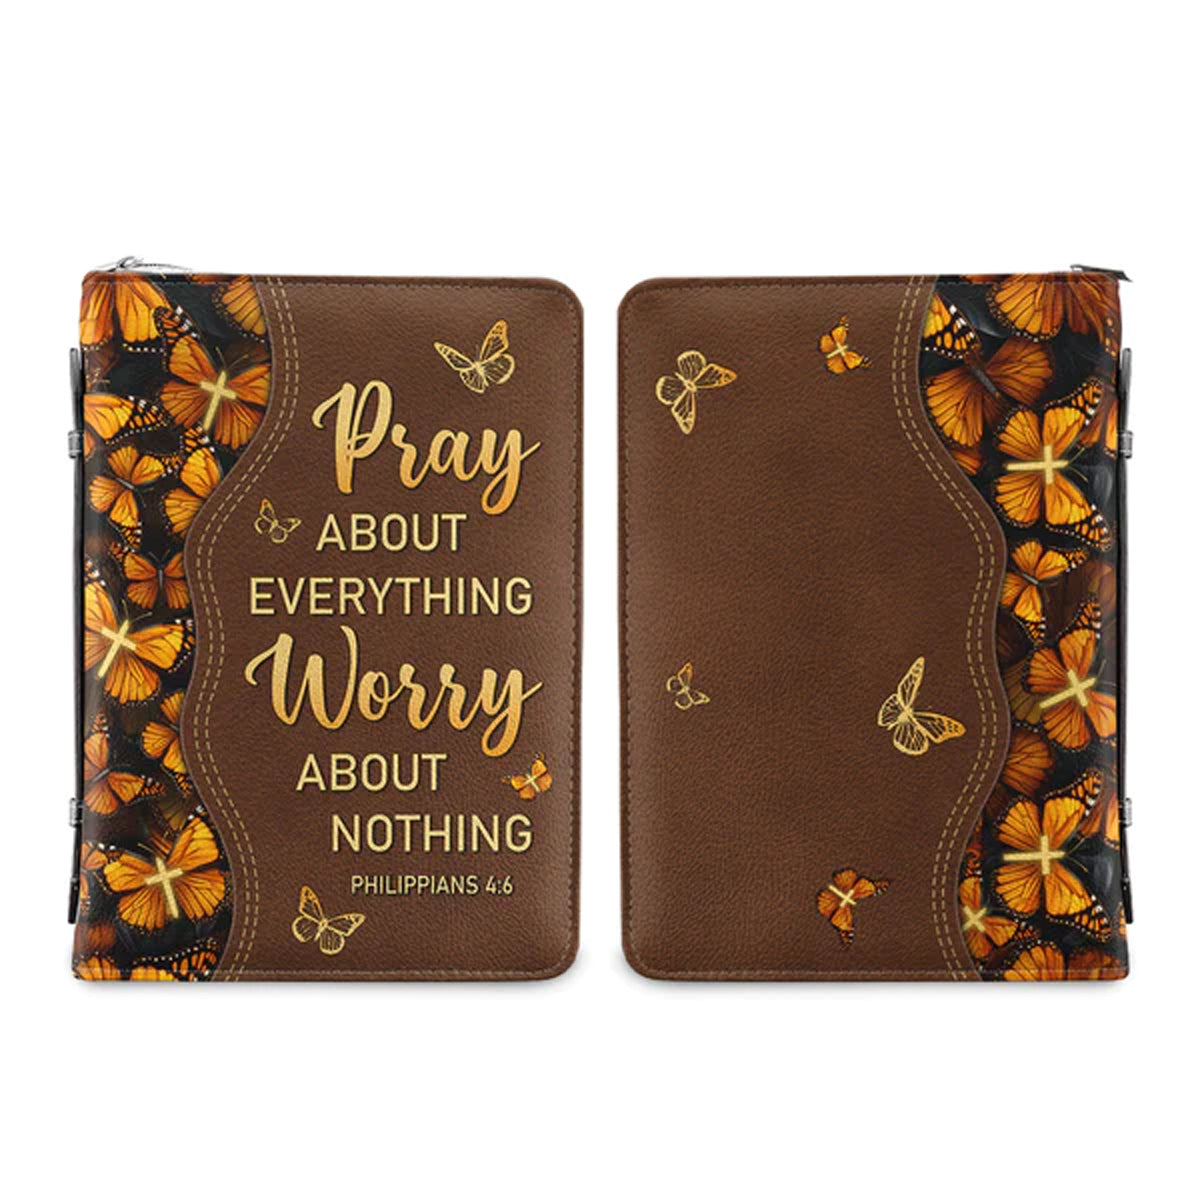 Christianart Bible Cover, Pray About Everything Worry About Nothing Philippians 4:6 Butterfly, Gifts For Women, Gifts For Men, Christmas Gift. - Christian Art Bag